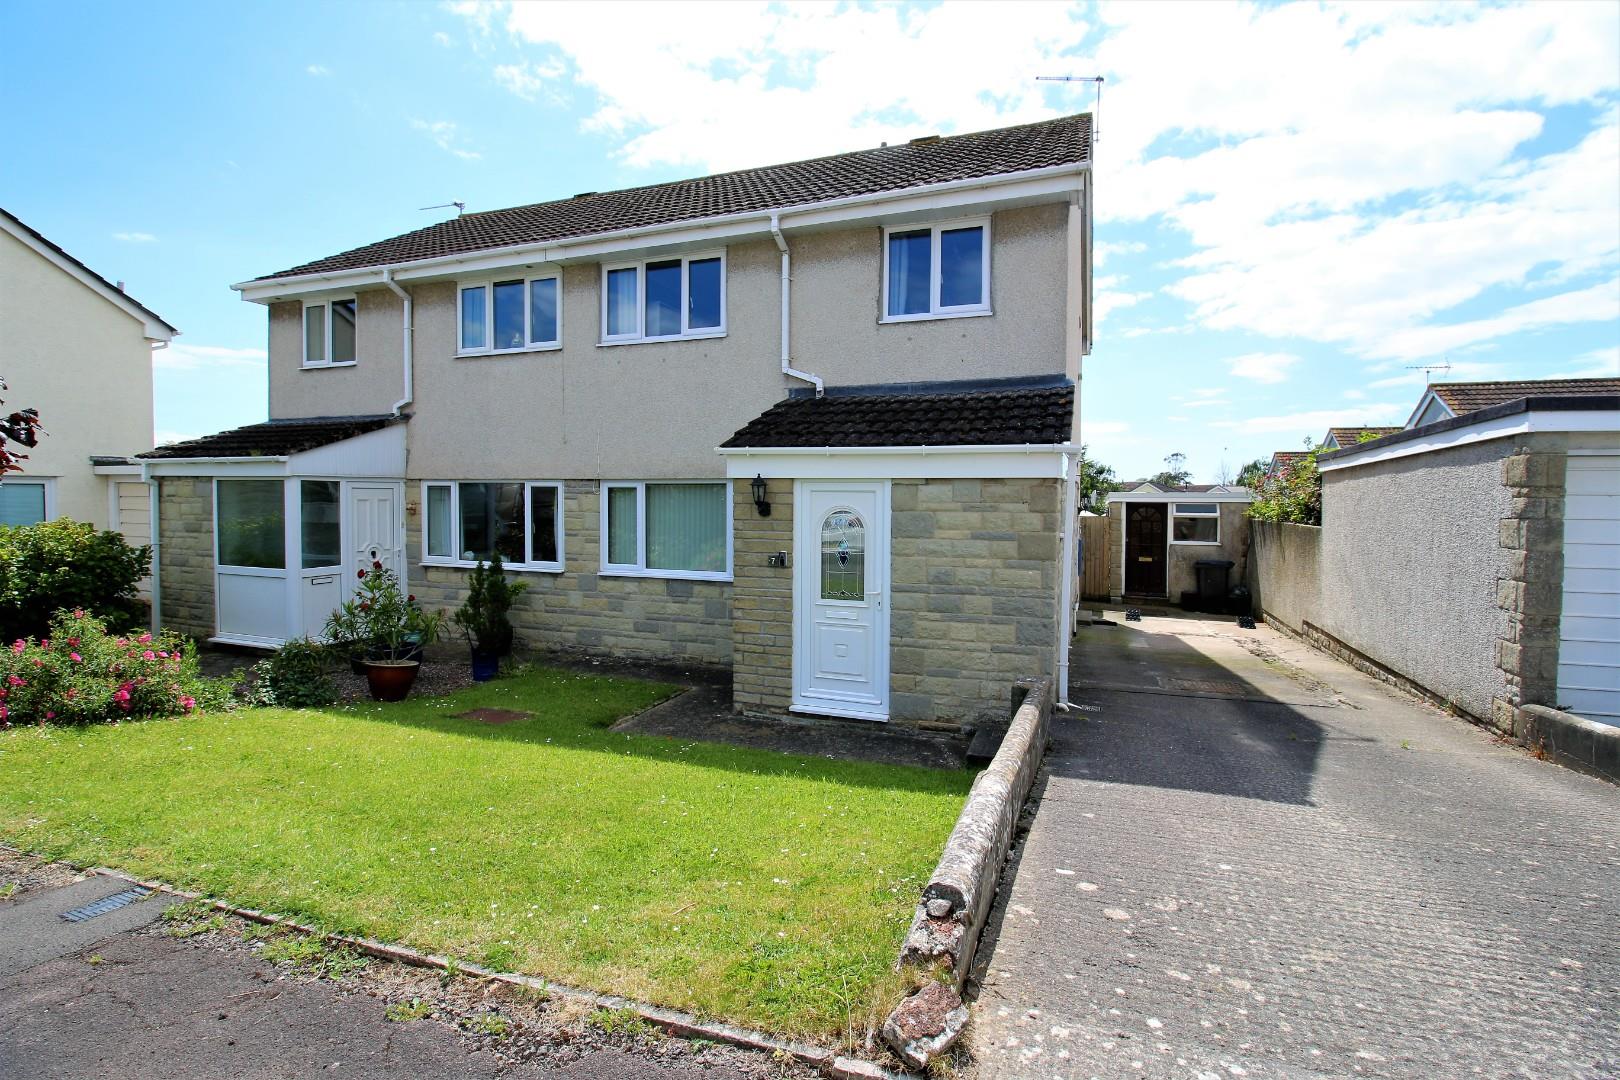 Wonderful, three bedroom family home, situated centrally in the village of Yatton